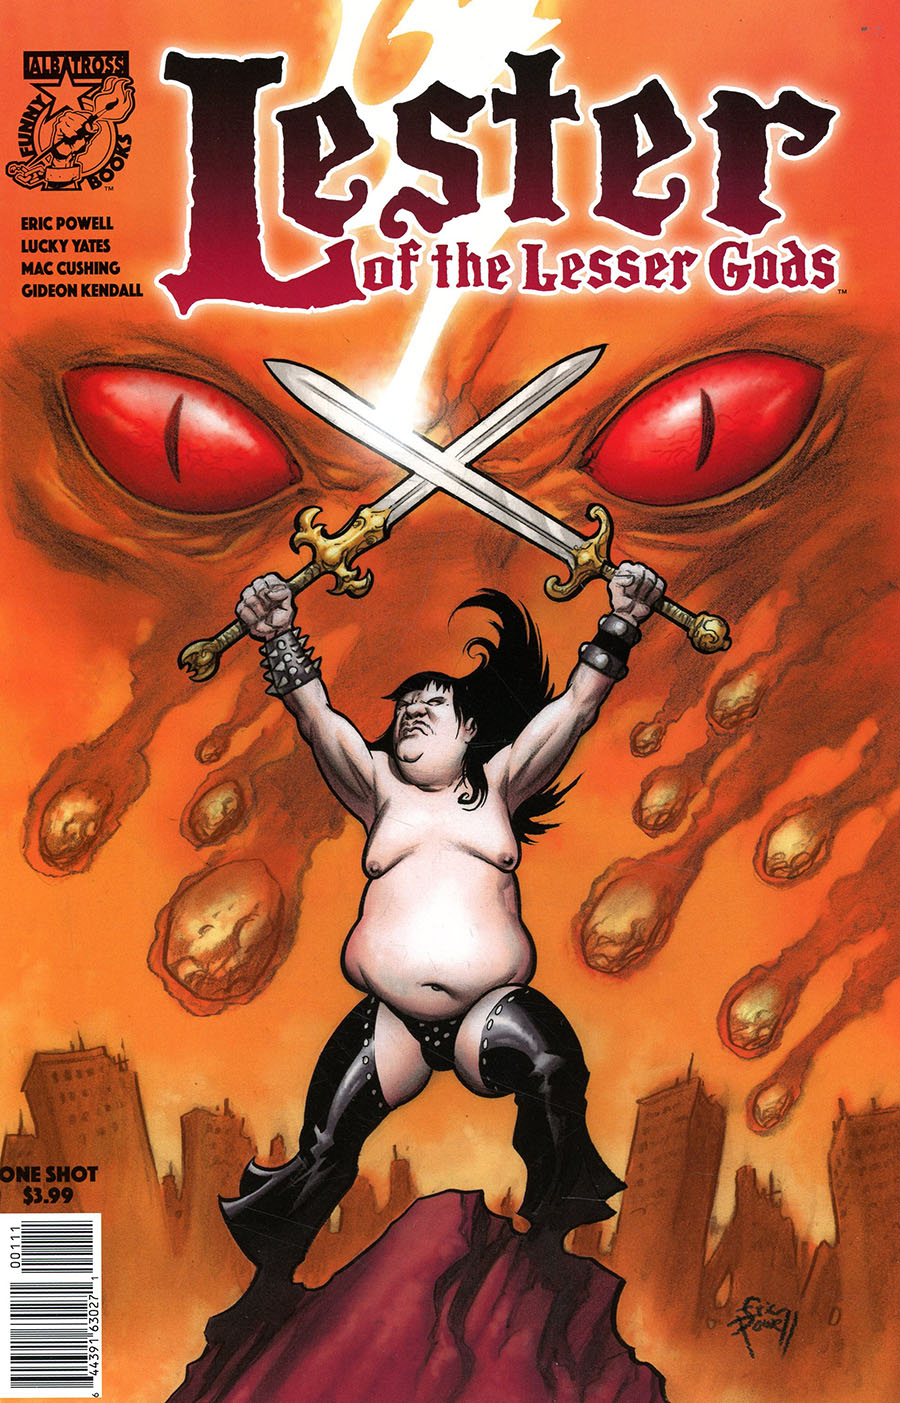 Lester Of The Lesser Gods #1 (One Shot) Cover A Regular Eric Powell Cover